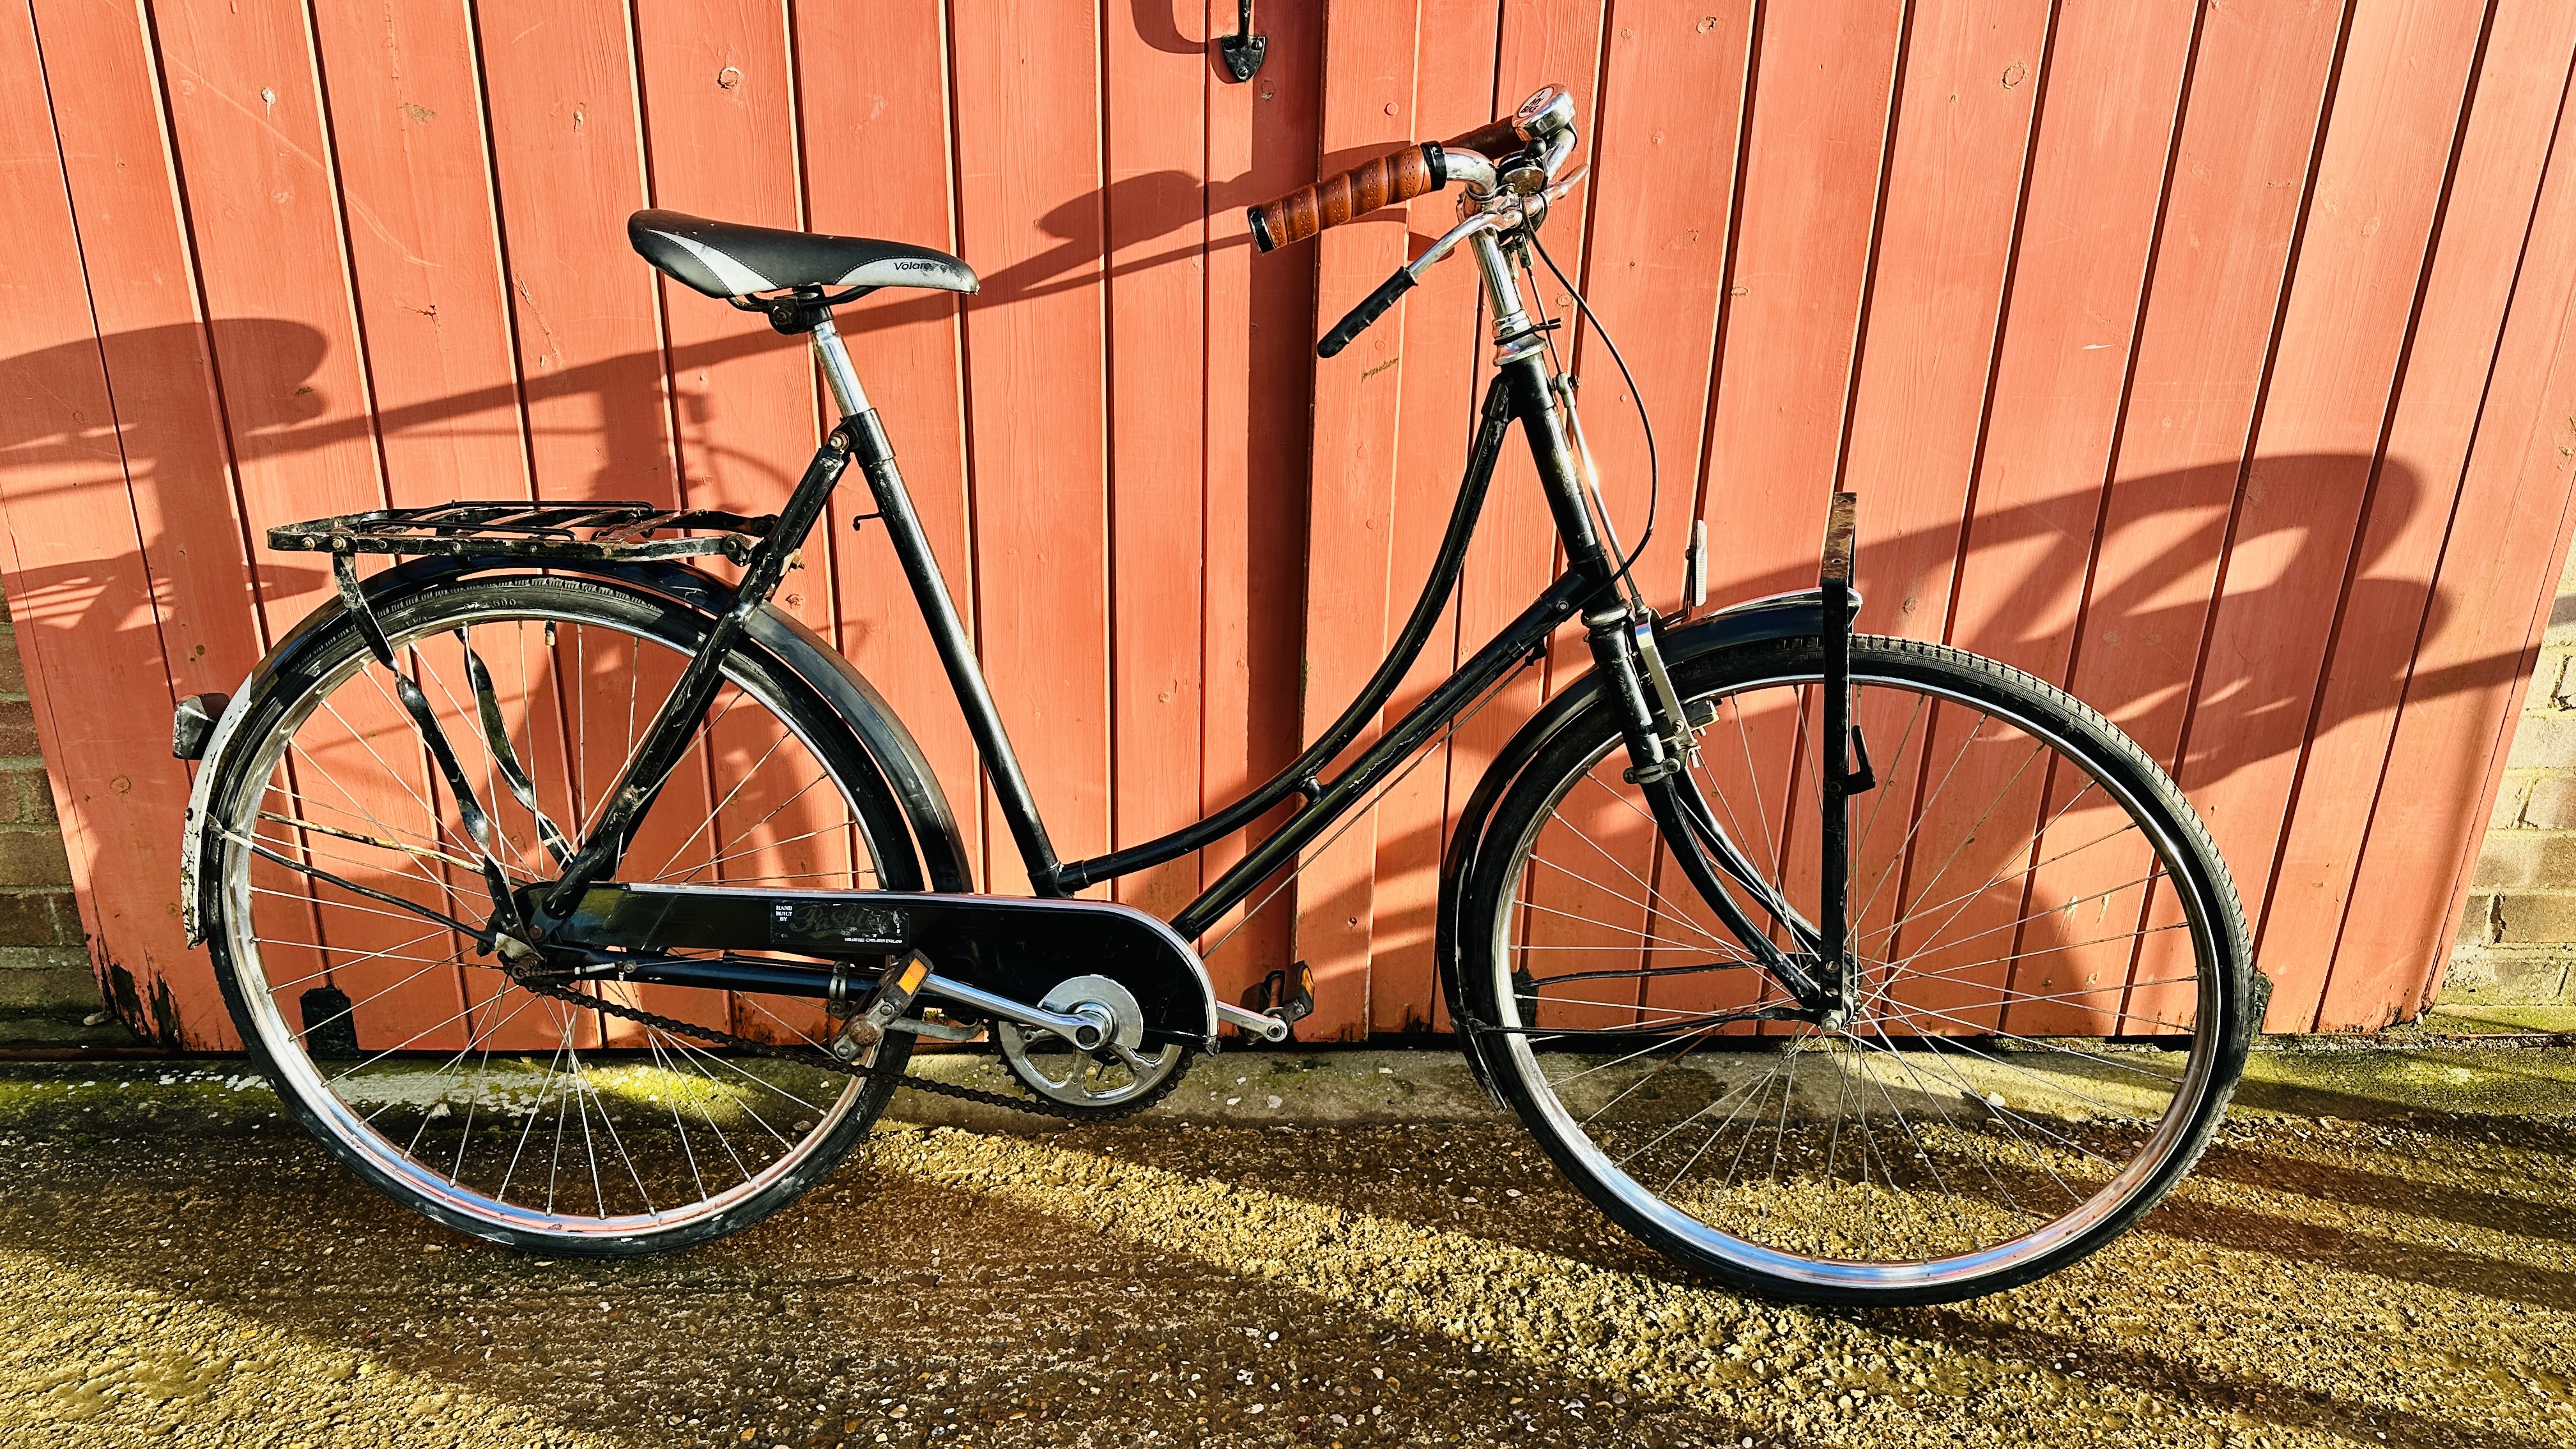 A VINTAGE PASHLEY STEP THROUGH 3 SPEED BICYCLE.